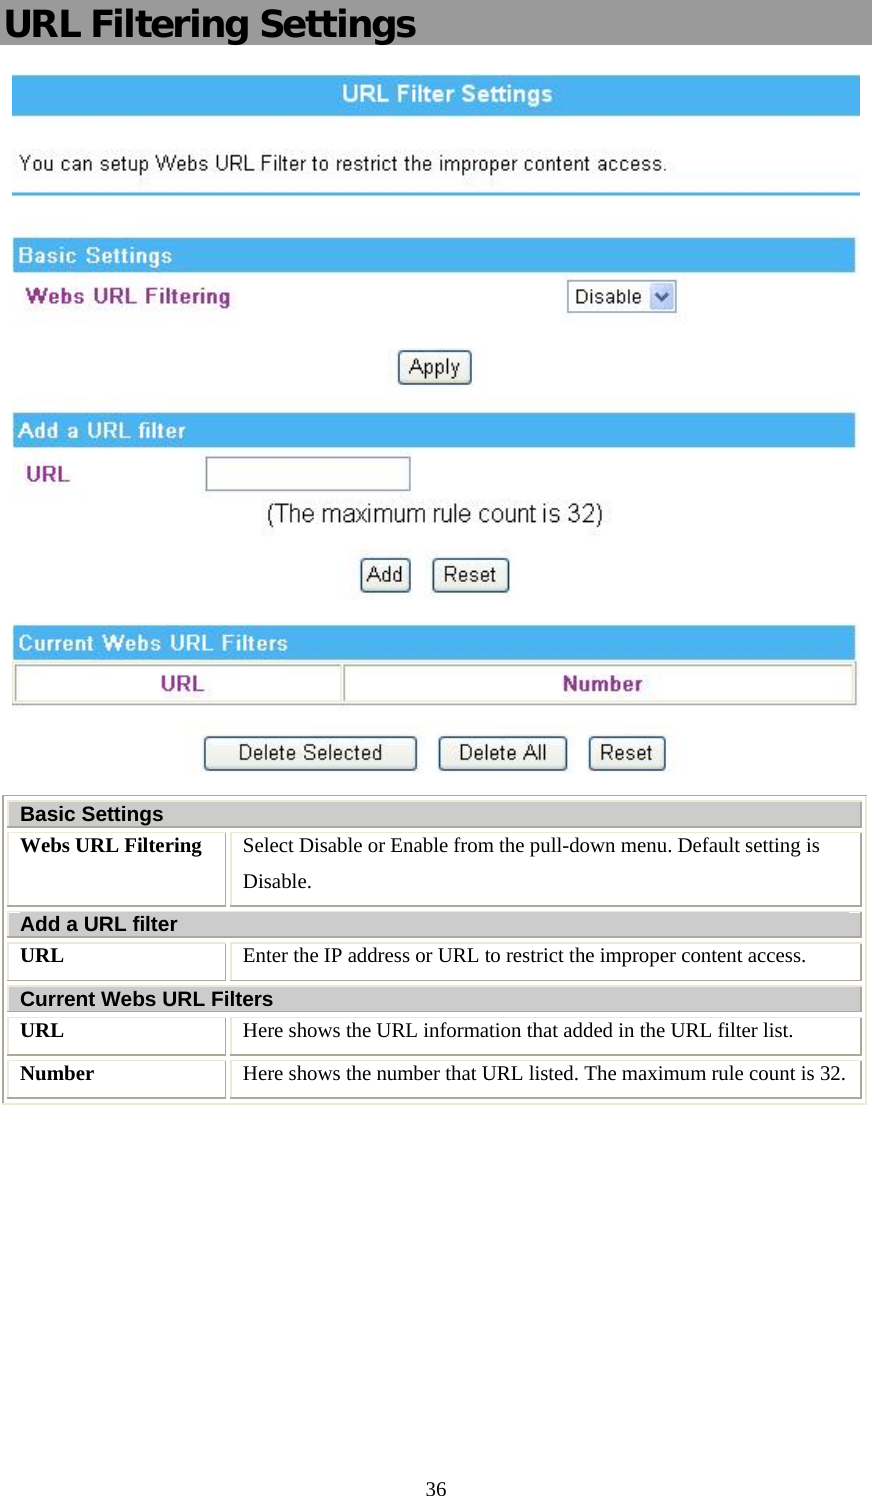   36URL Filtering Settings  Basic Settings Webs URL Filtering  Select Disable or Enable from the pull-down menu. Default setting is Disable.  Add a URL filter URL  Enter the IP address or URL to restrict the improper content access.  Current Webs URL Filters URL  Here shows the URL information that added in the URL filter list. Number   Here shows the number that URL listed. The maximum rule count is 32.    